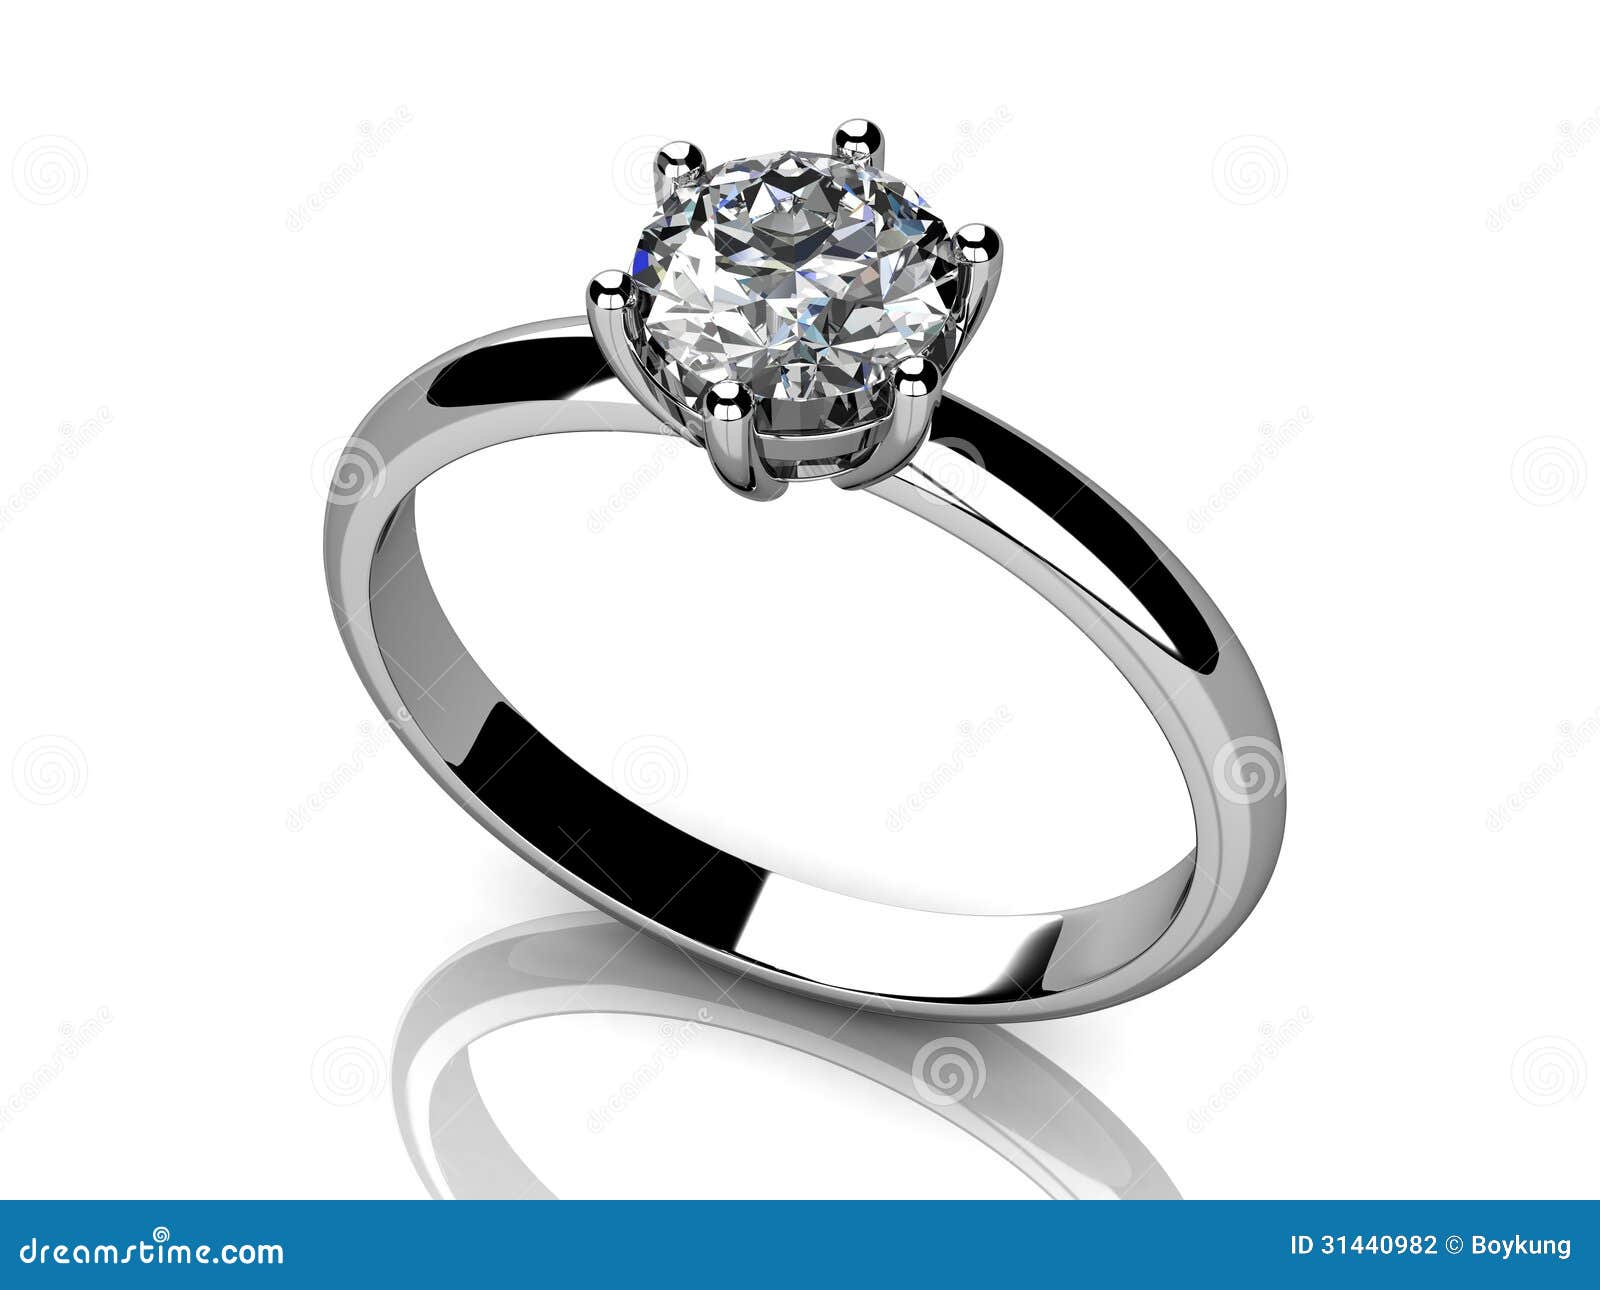 Jewellery Ring Stock Photography - Image: 31440982